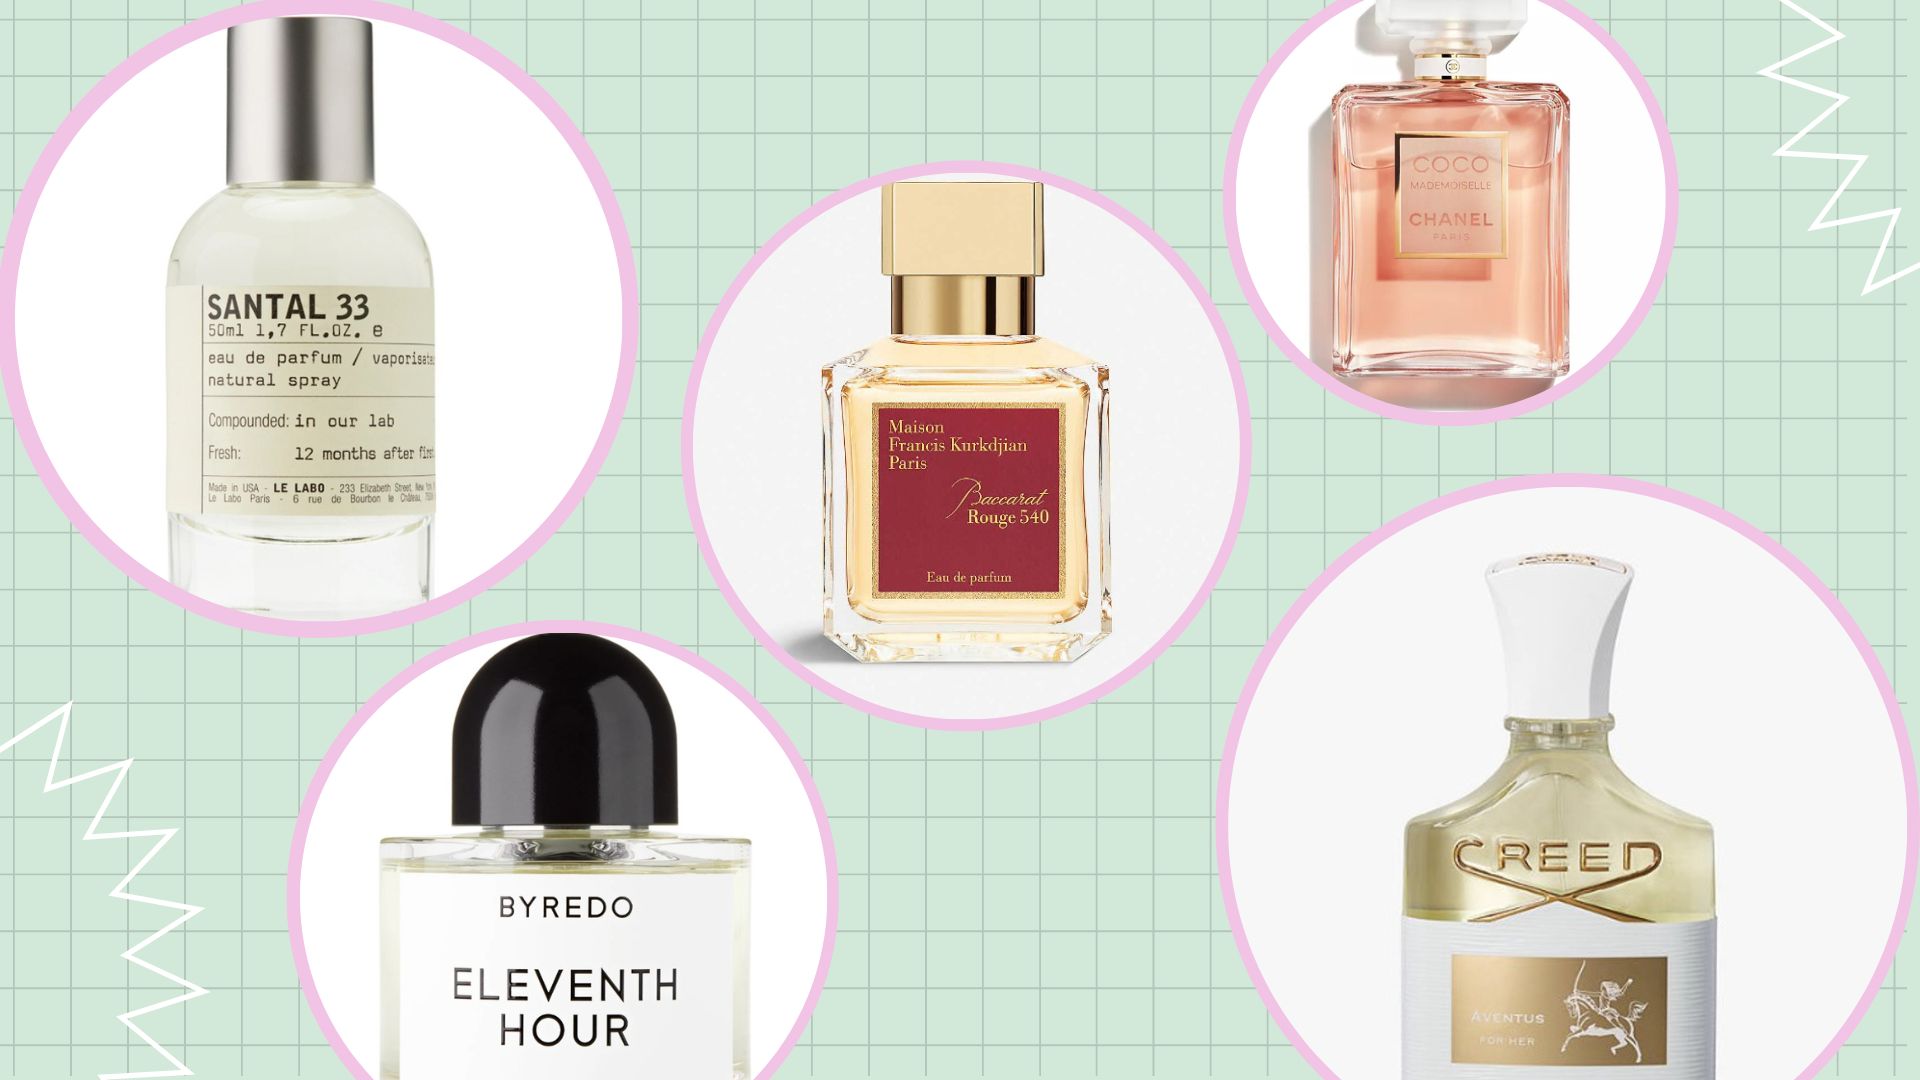 Best Black Friday perfume deals on Chanel, Le Labo and more